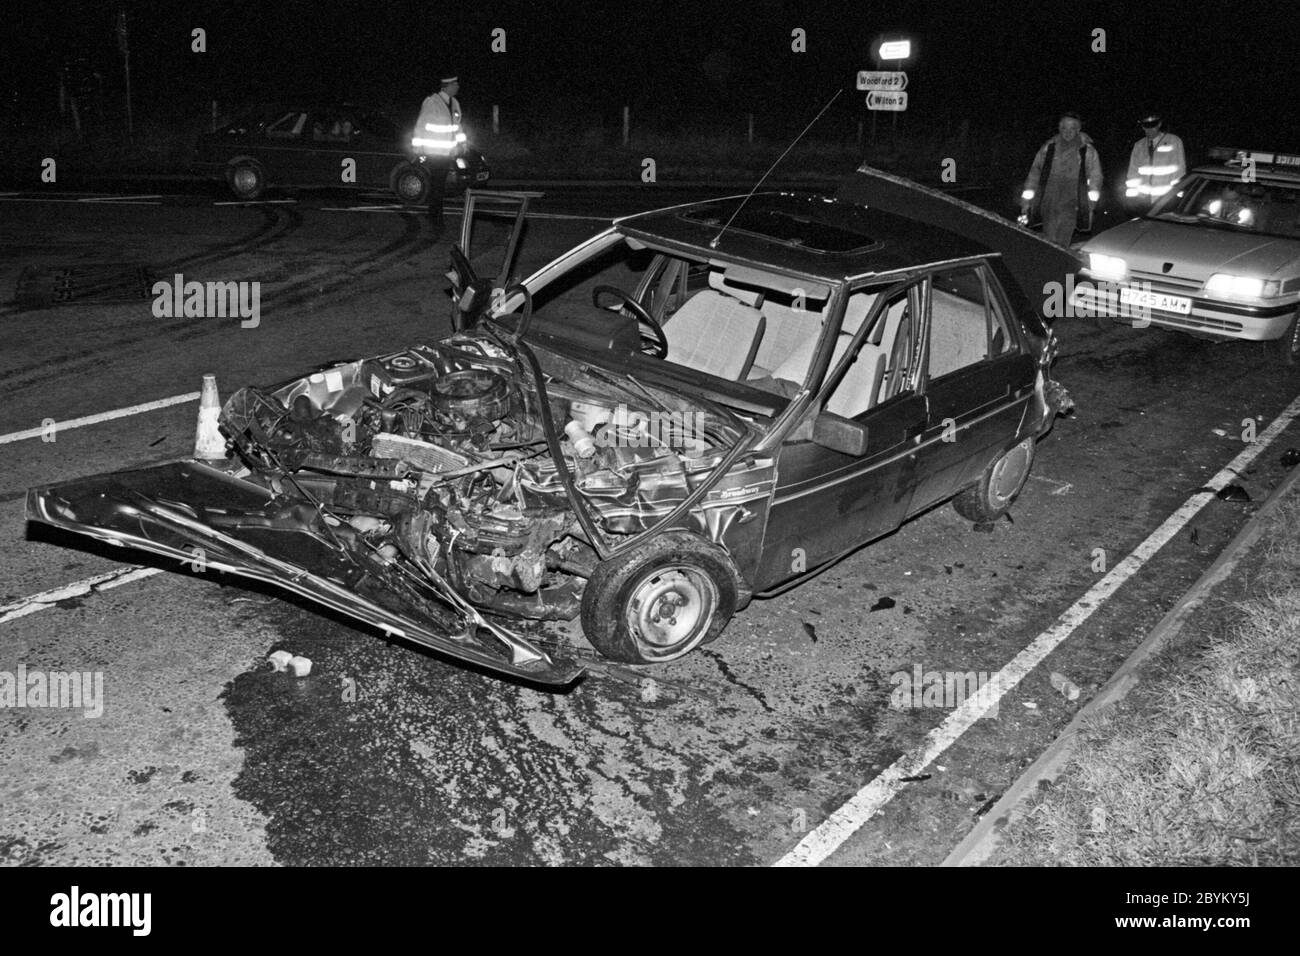 1992 - A wrecked Renault 9 car following a road traffic accident on the outskirts of Salisbury in Wiltshire UK. No serious injuries were sustained. Stock Photo